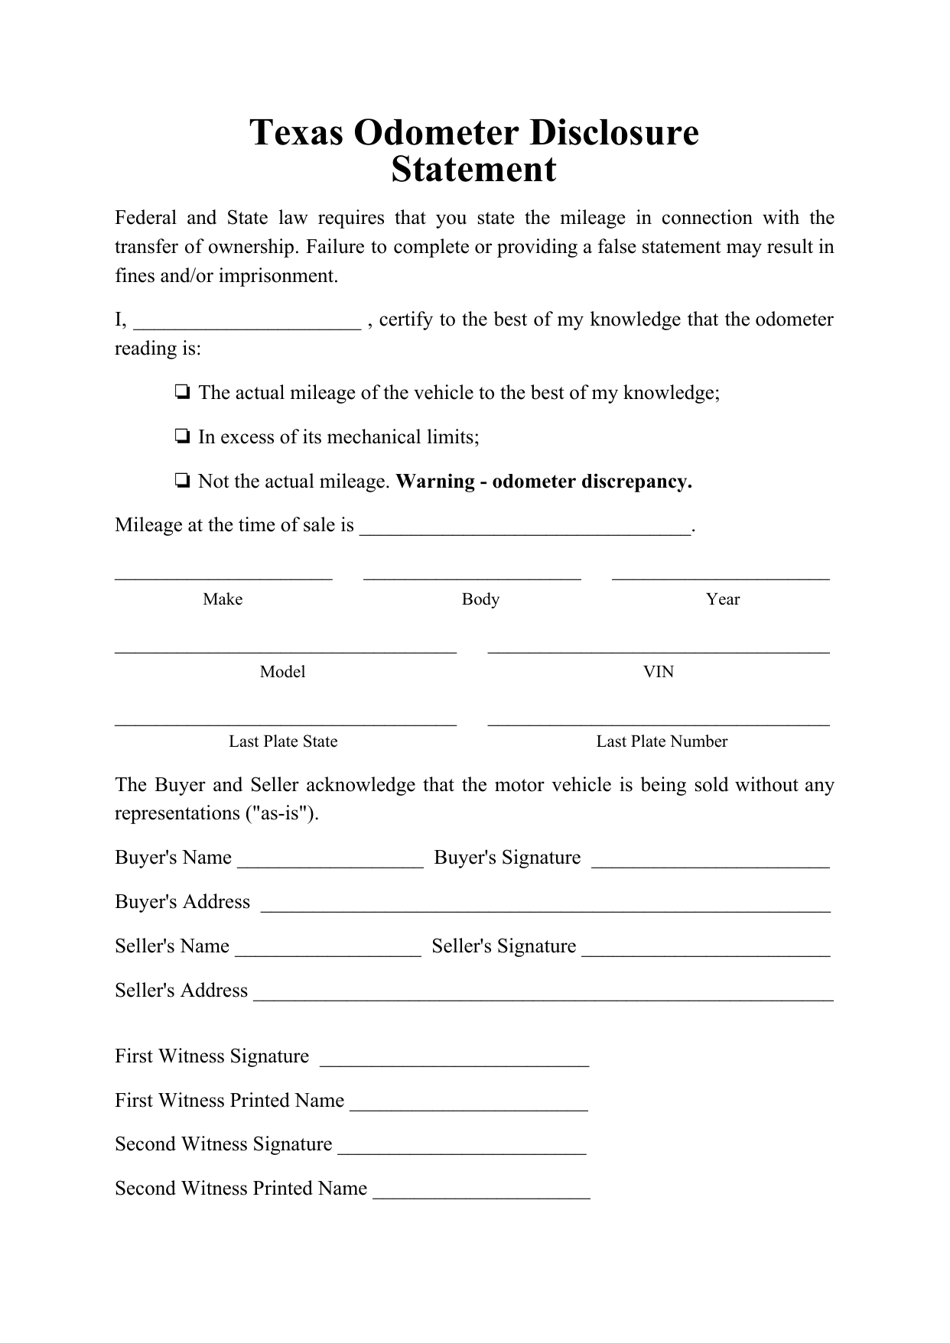 Odometer Disclosure Statement Form - Texas, Page 1